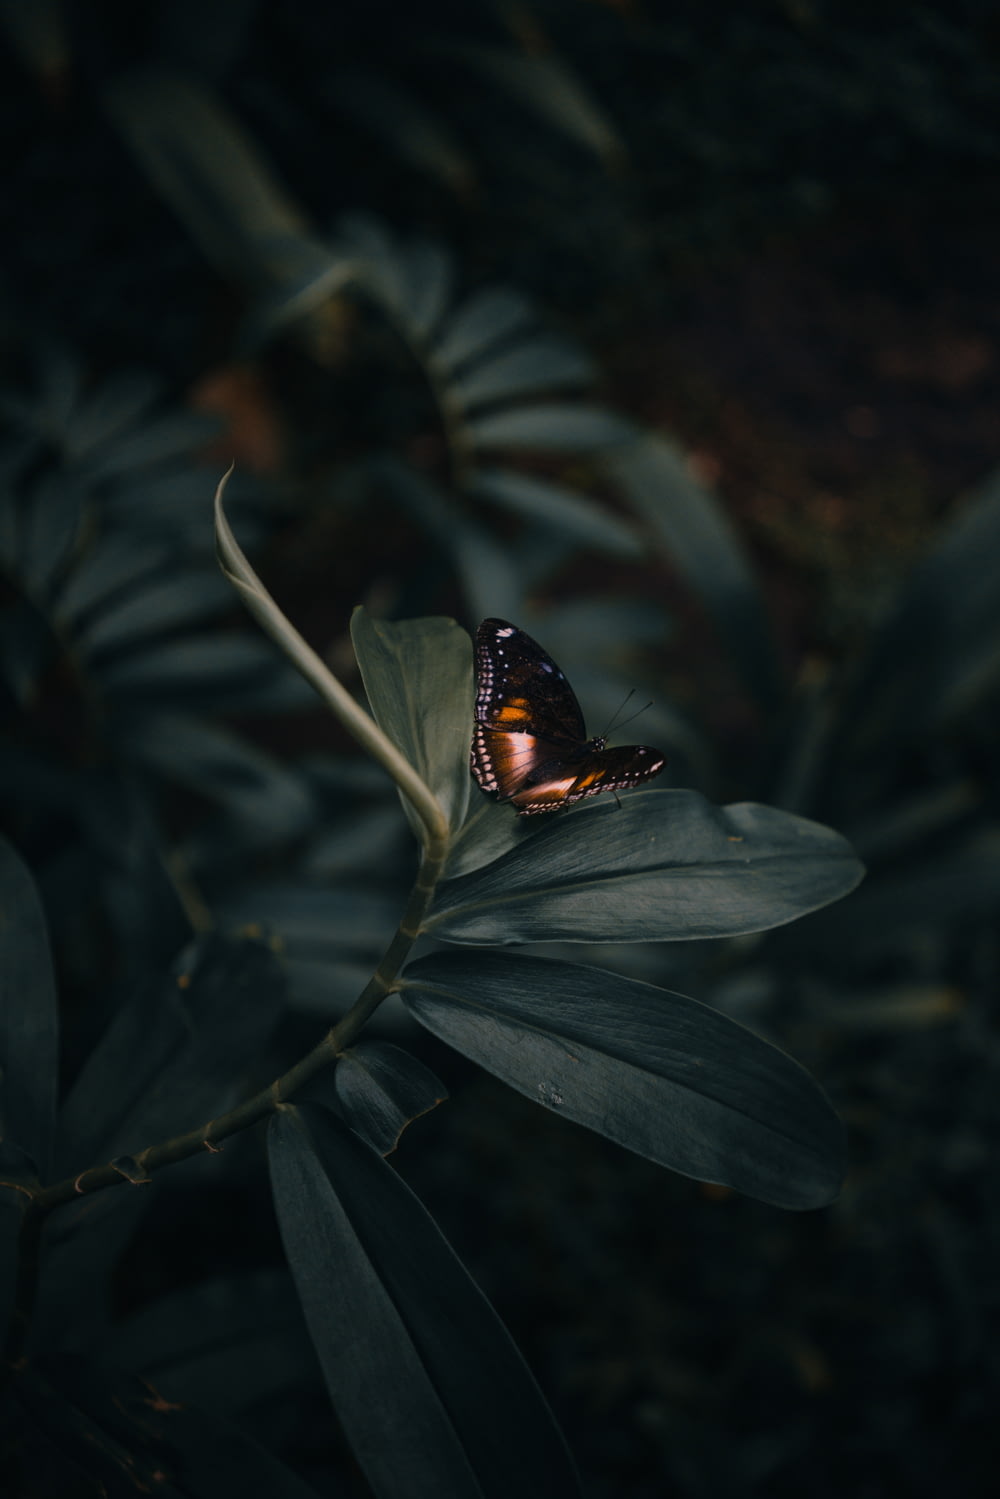 butterfly perching on leaves